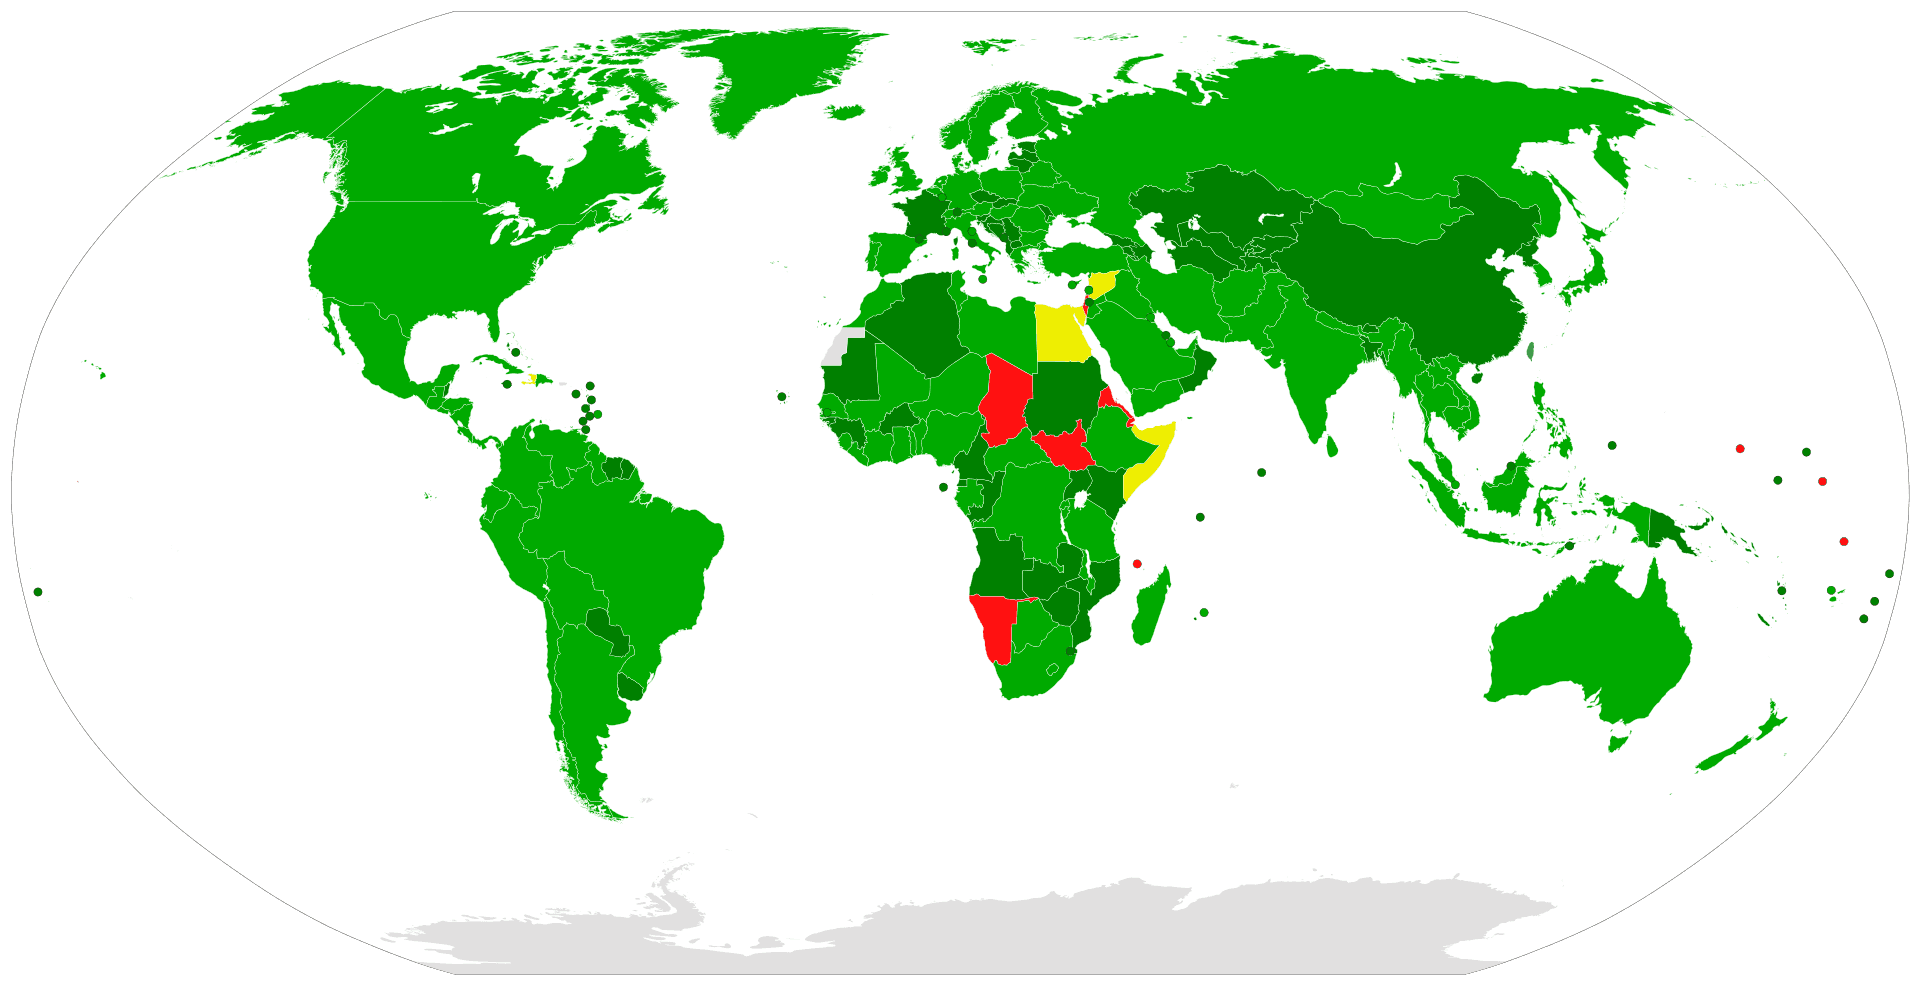 Participation in the Biological Weapons Convention